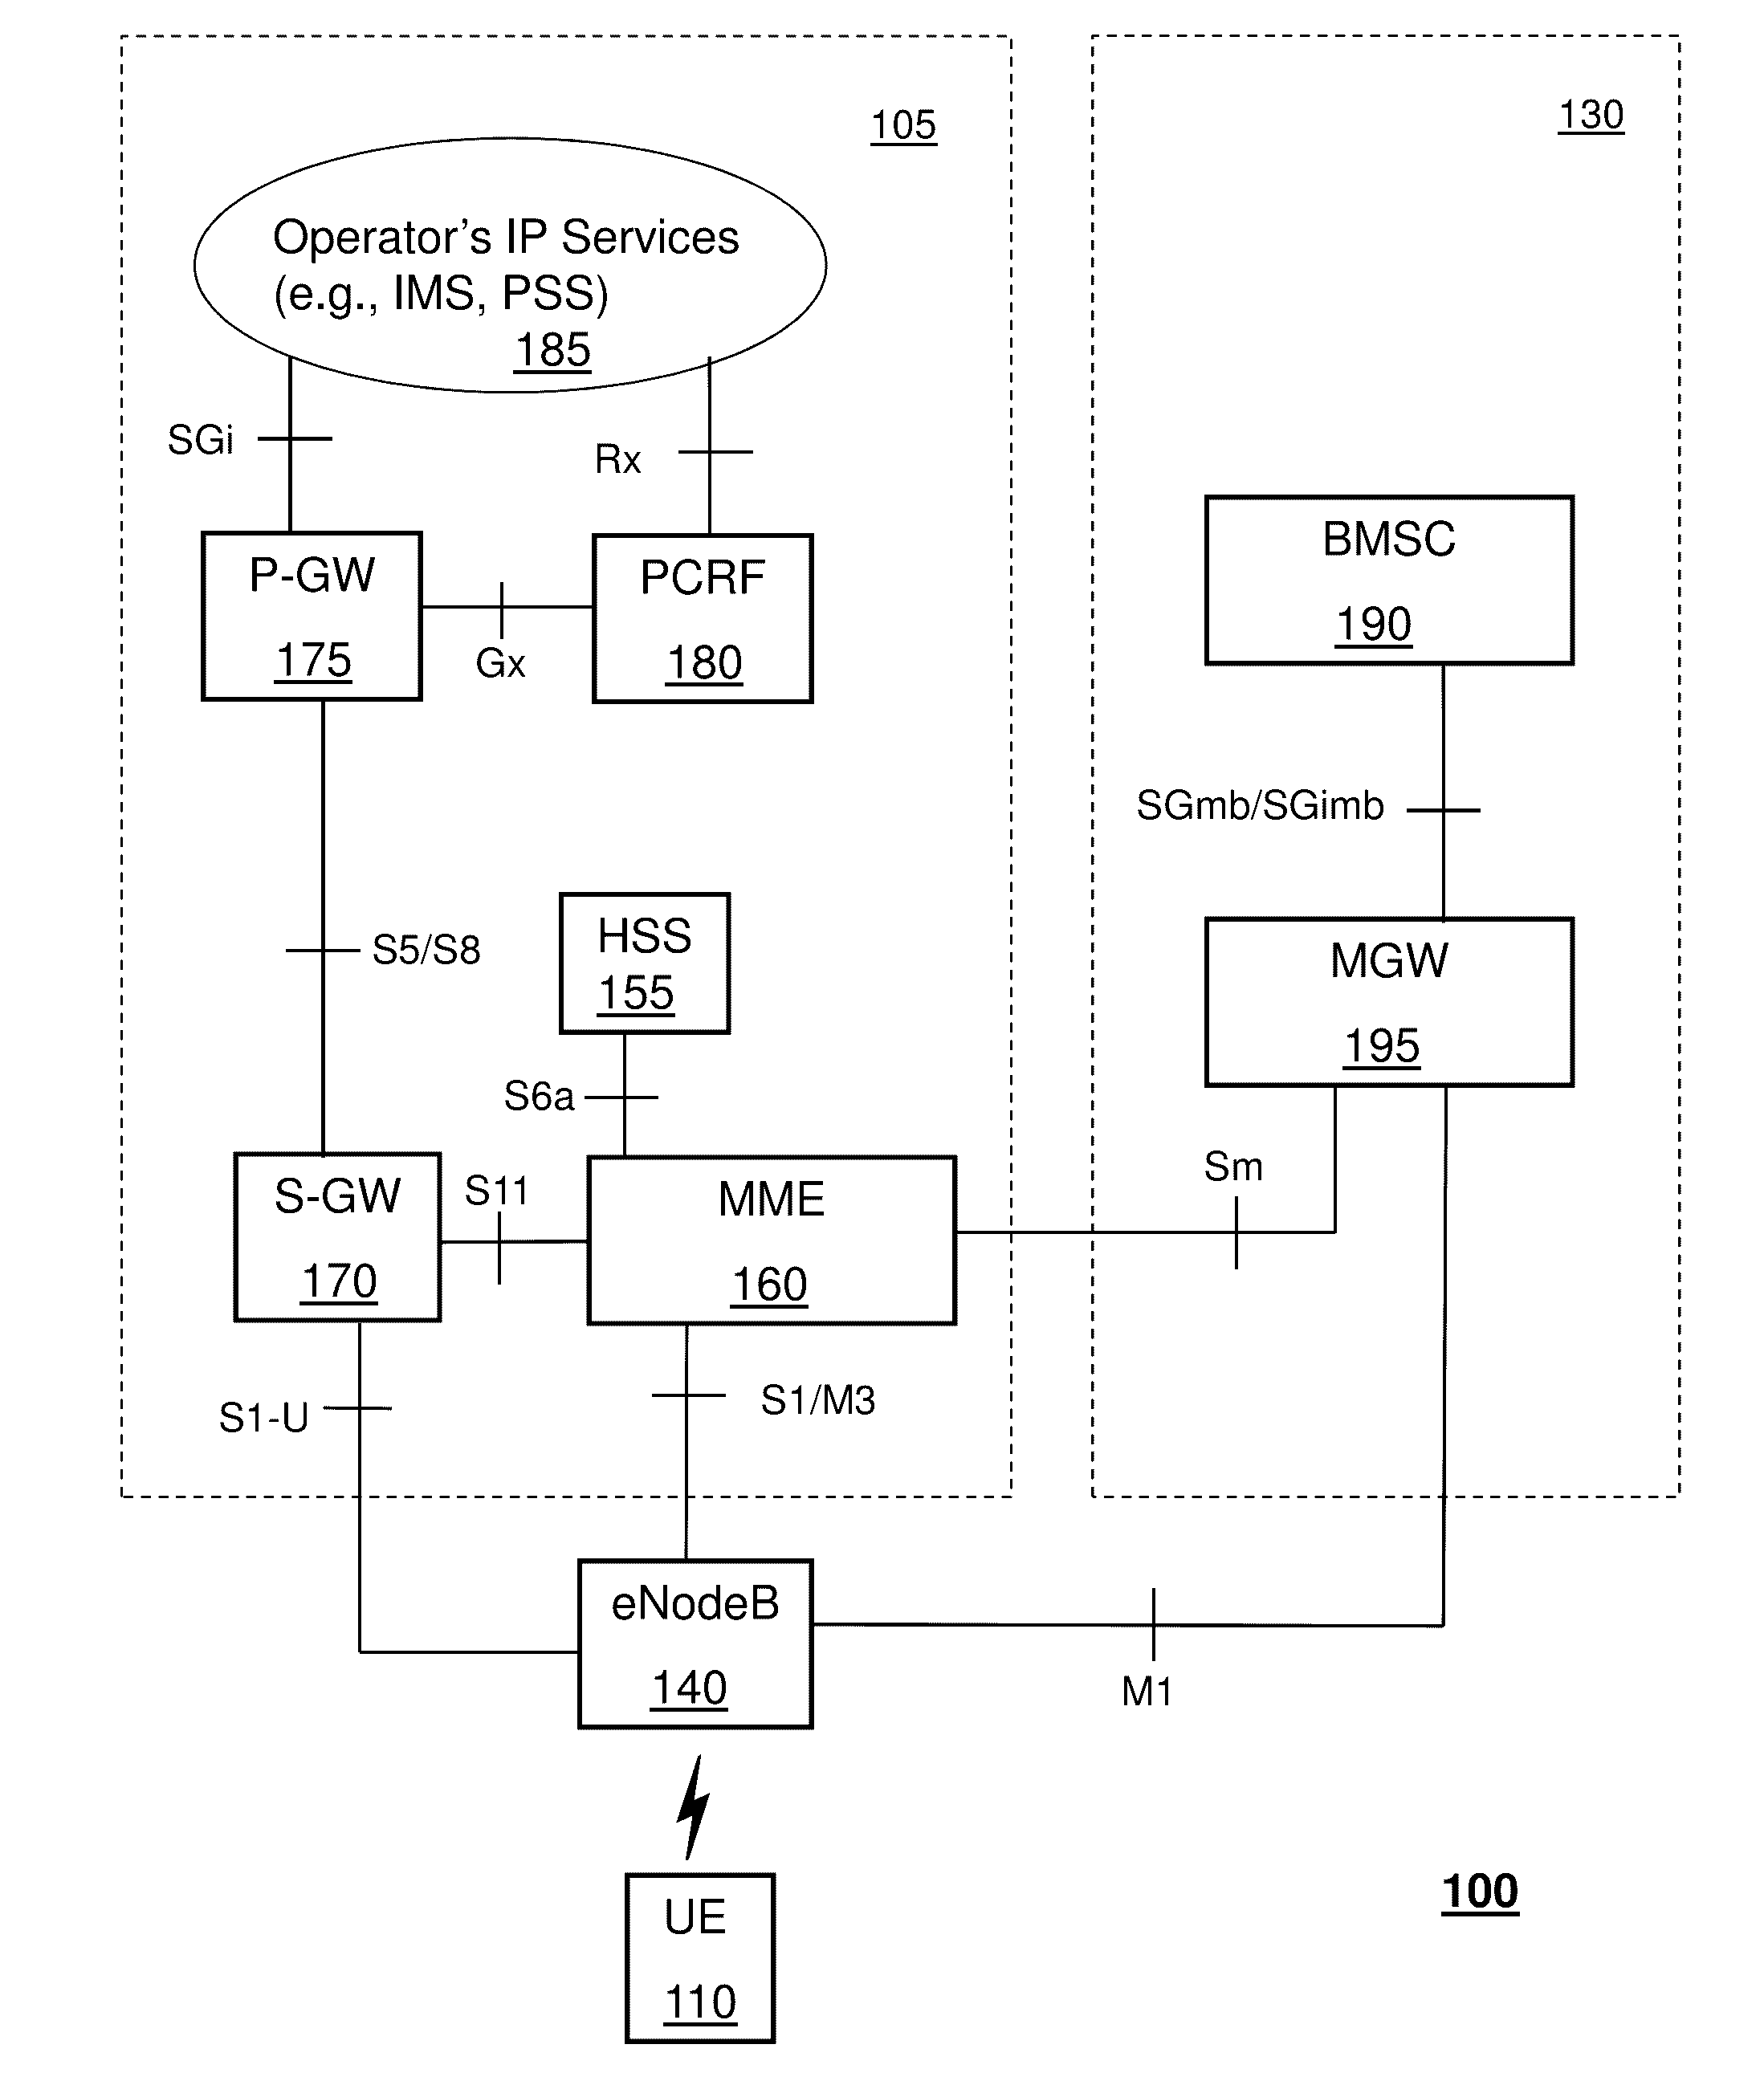 Method and system for providing media services in a communication system